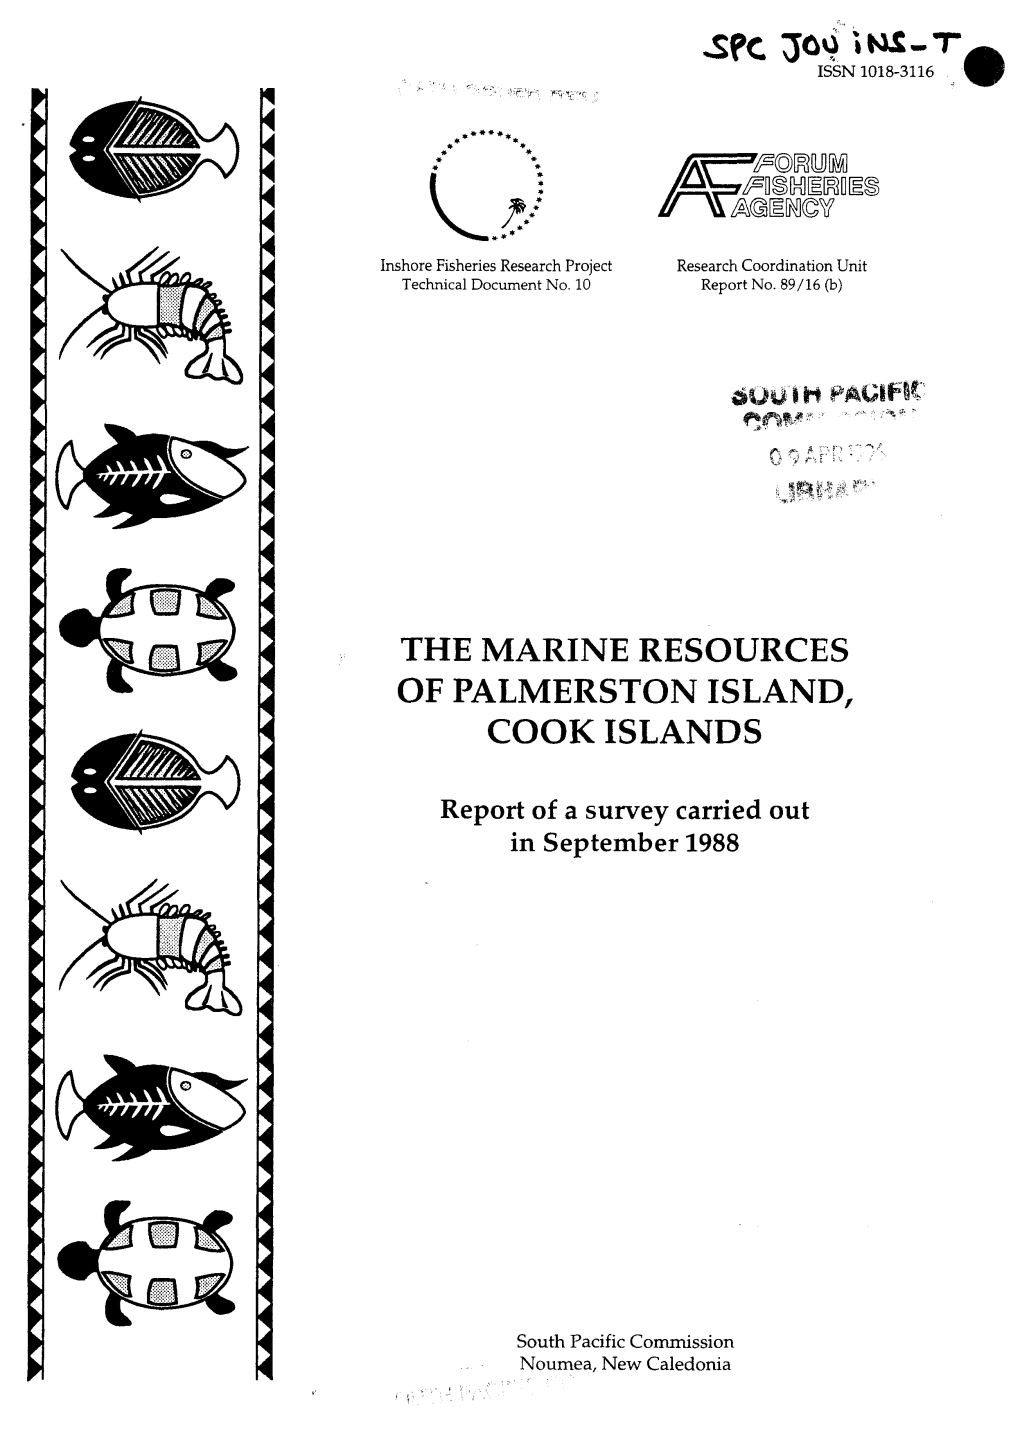 The Marine Resources of Palmerston Island, Cook Islands